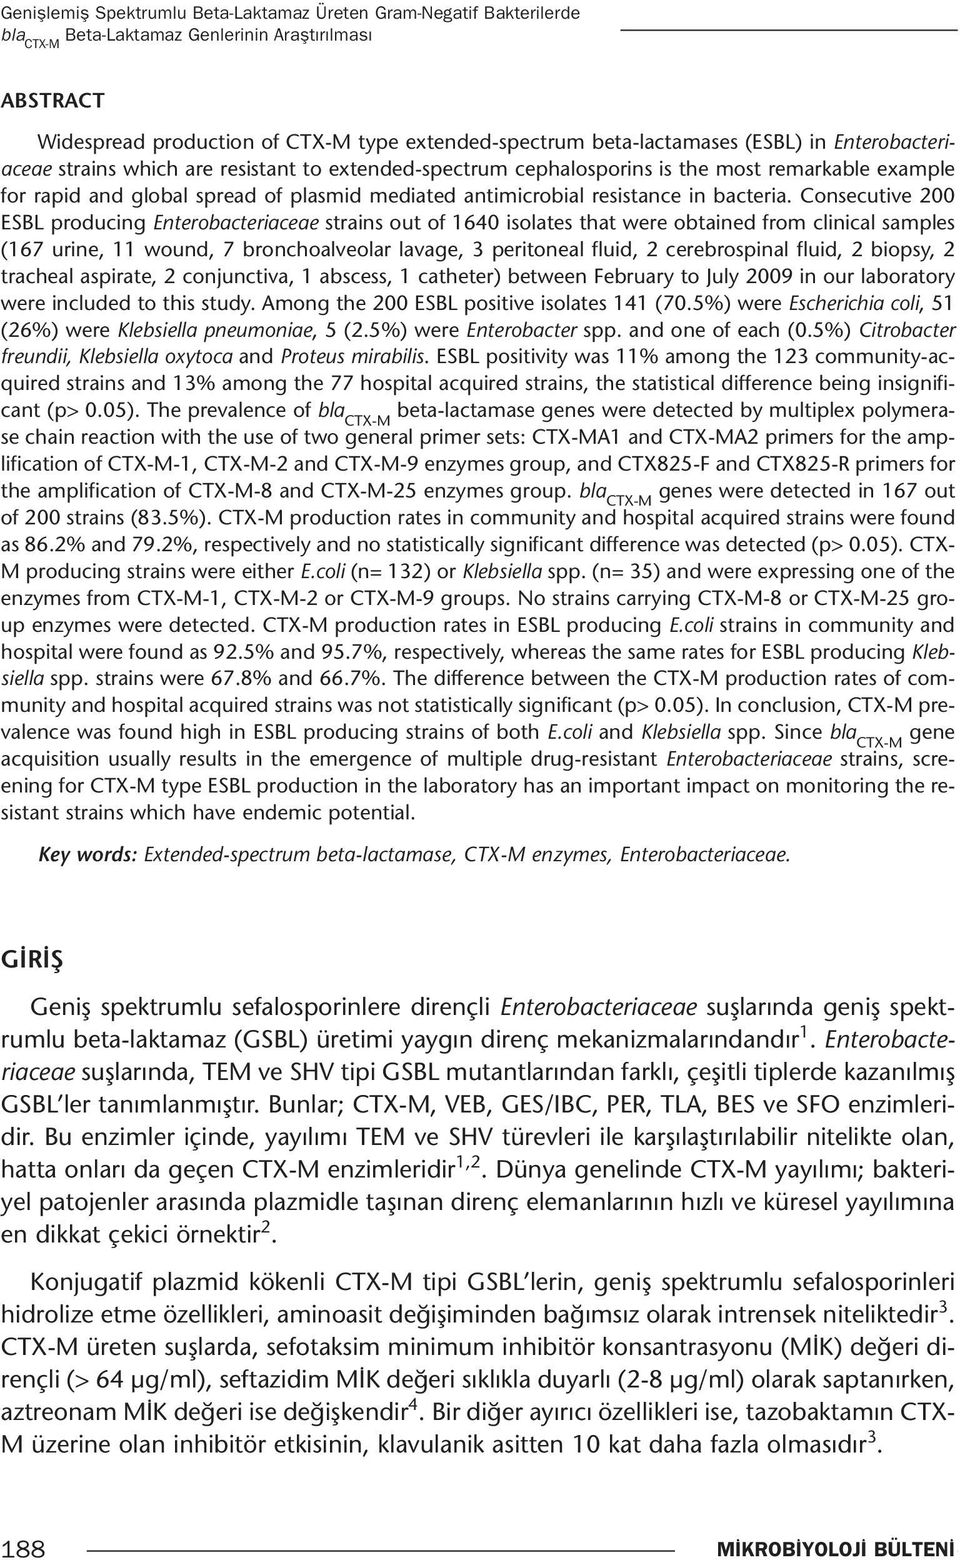 Consecutive 200 ESBL producing Enterobacteriaceae strains out of 1640 isolates that were obtained from clinical samples (167 urine, 11 wound, 7 bronchoalveolar lavage, 3 peritoneal fluid, 2